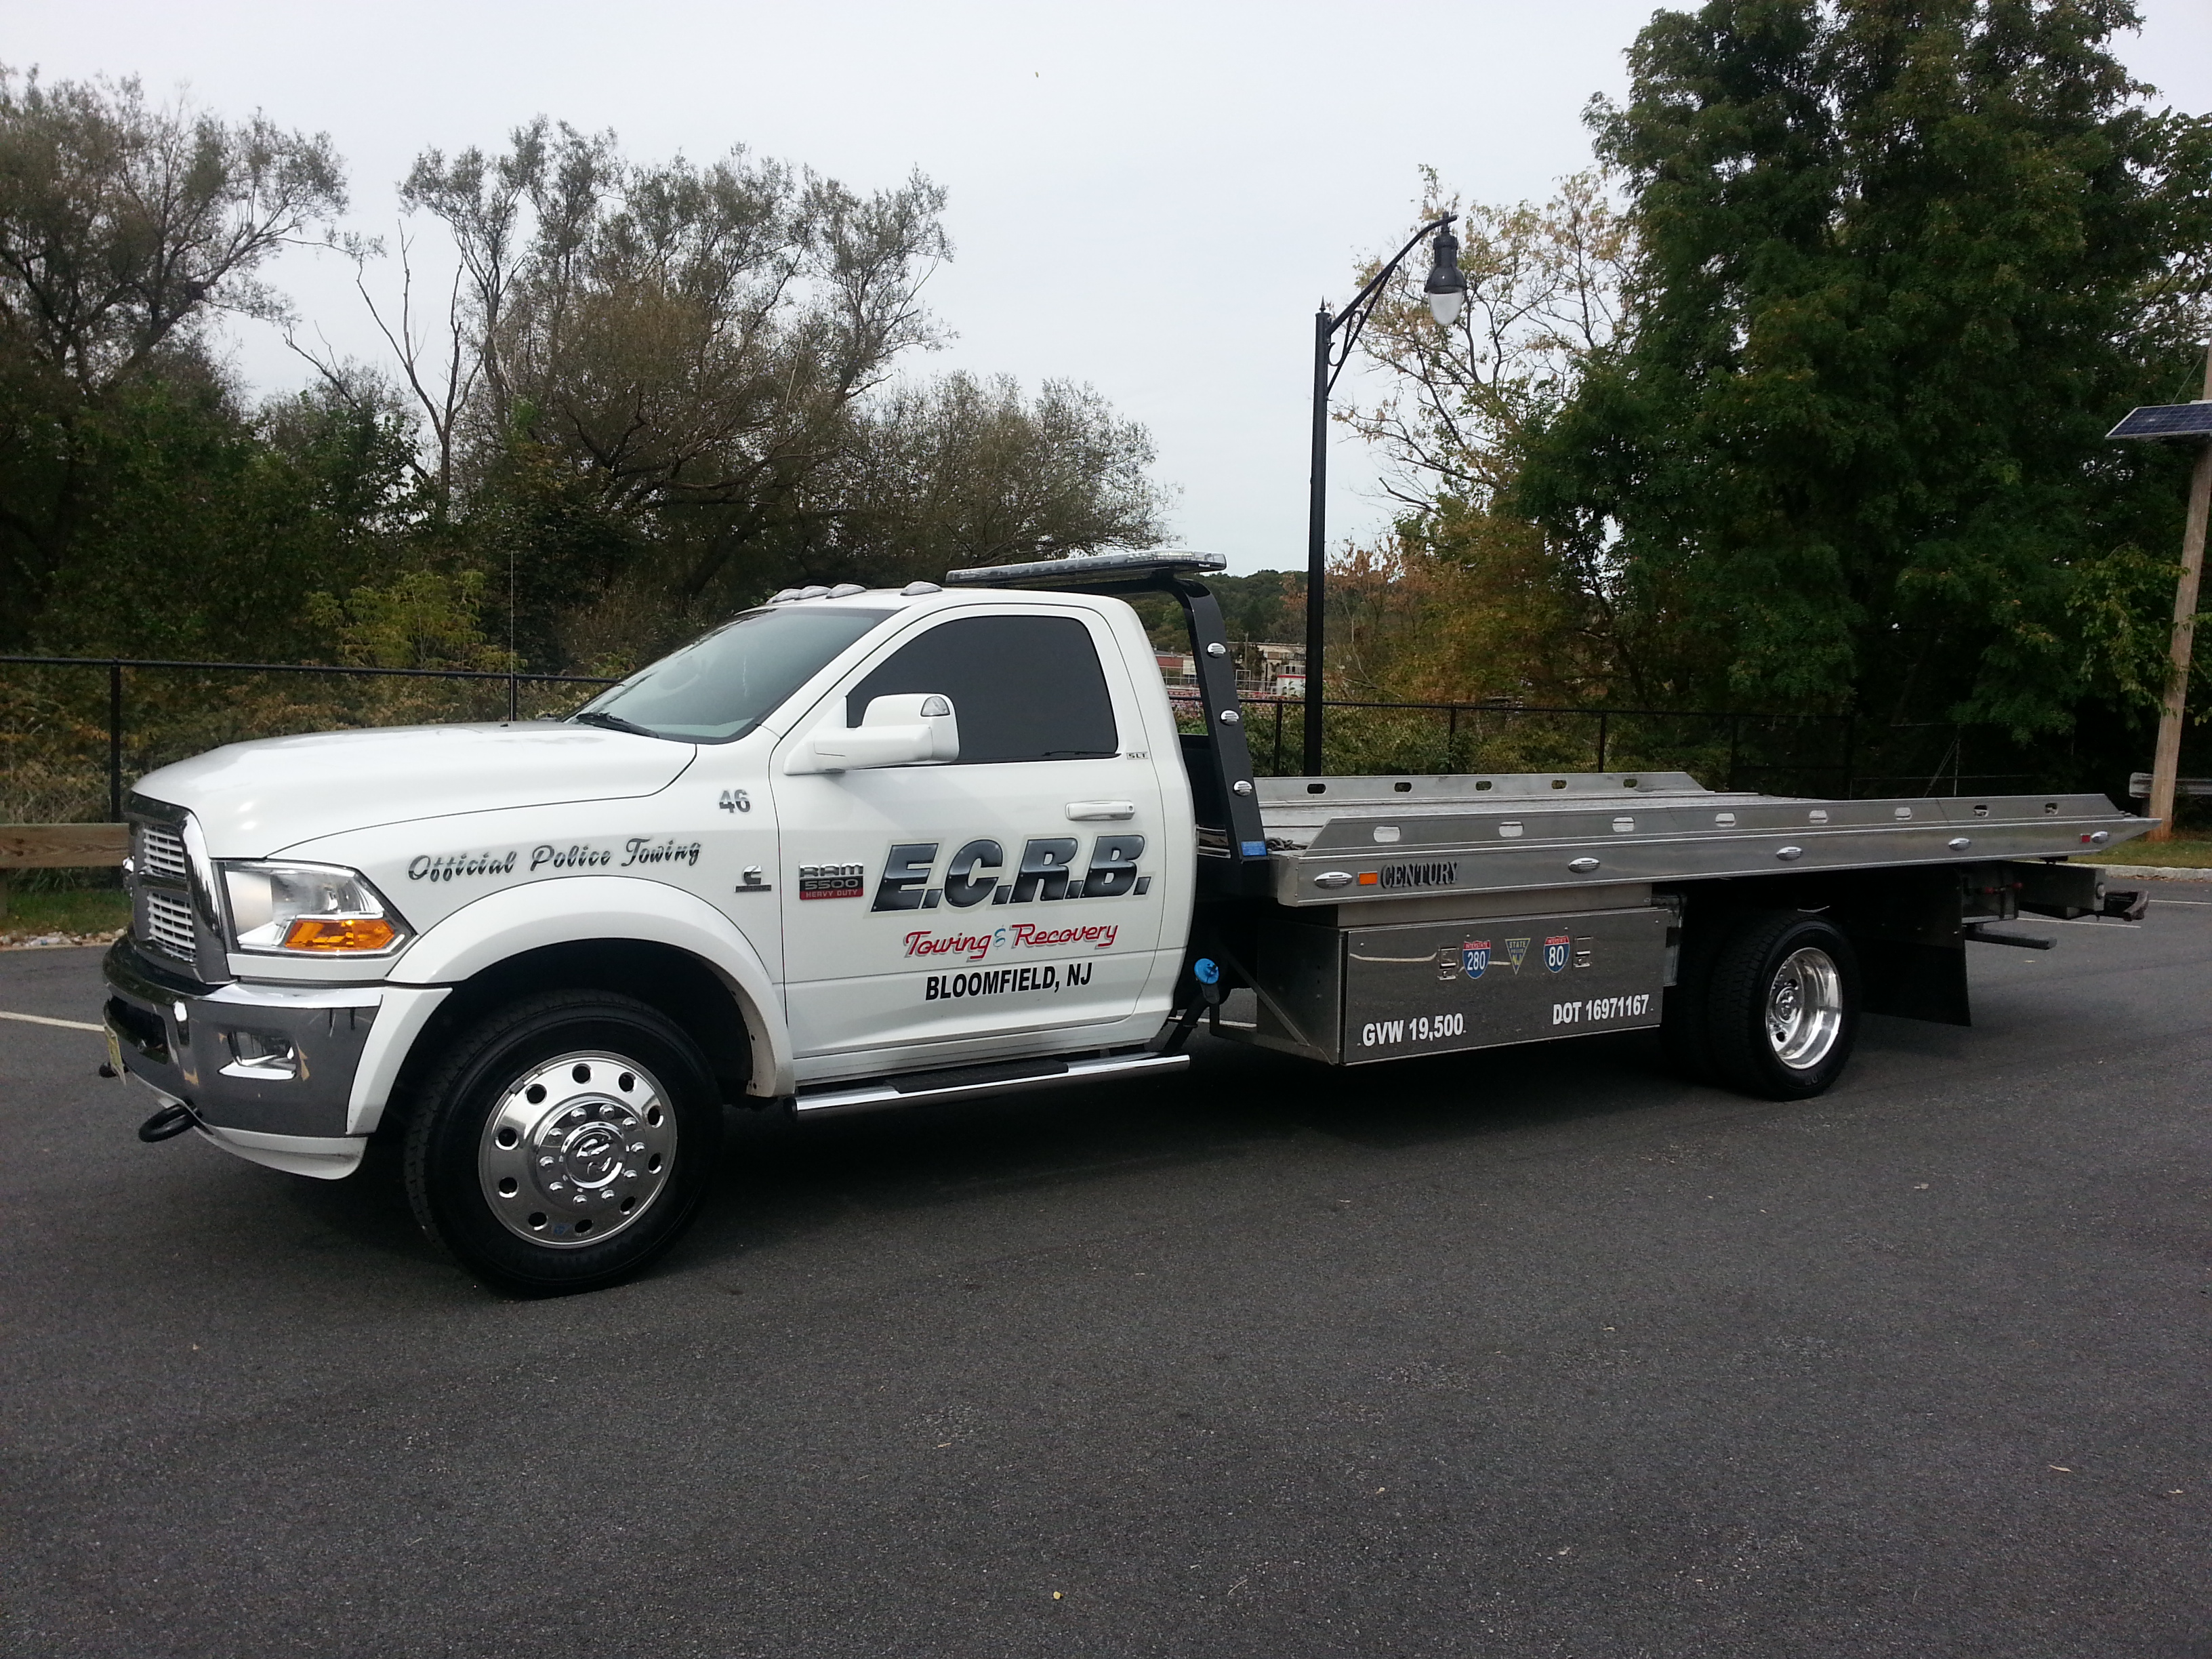 E.C.R.B. (Essex County Recovery Bureau, Inc.) is a privately owned, family business established in 1997.  Our hard work and dedication have allowed us to rise above the rest, break the stereotype and become so much more than your typical towing company. We take pride in our ability to provide professional prompt service to all of our customers 24/7. Our courteous well-trained staff is prepared to assist you in your time of need. Our dispatch center is in constant communication with our drivers to ensure fast accurate service to our customers. All customers are important to us and treated with the utmost care, whether it's a tire change in the mini-van, a flatbed tow, or a heavy duty recovery E.C.R.B. can handle it all.